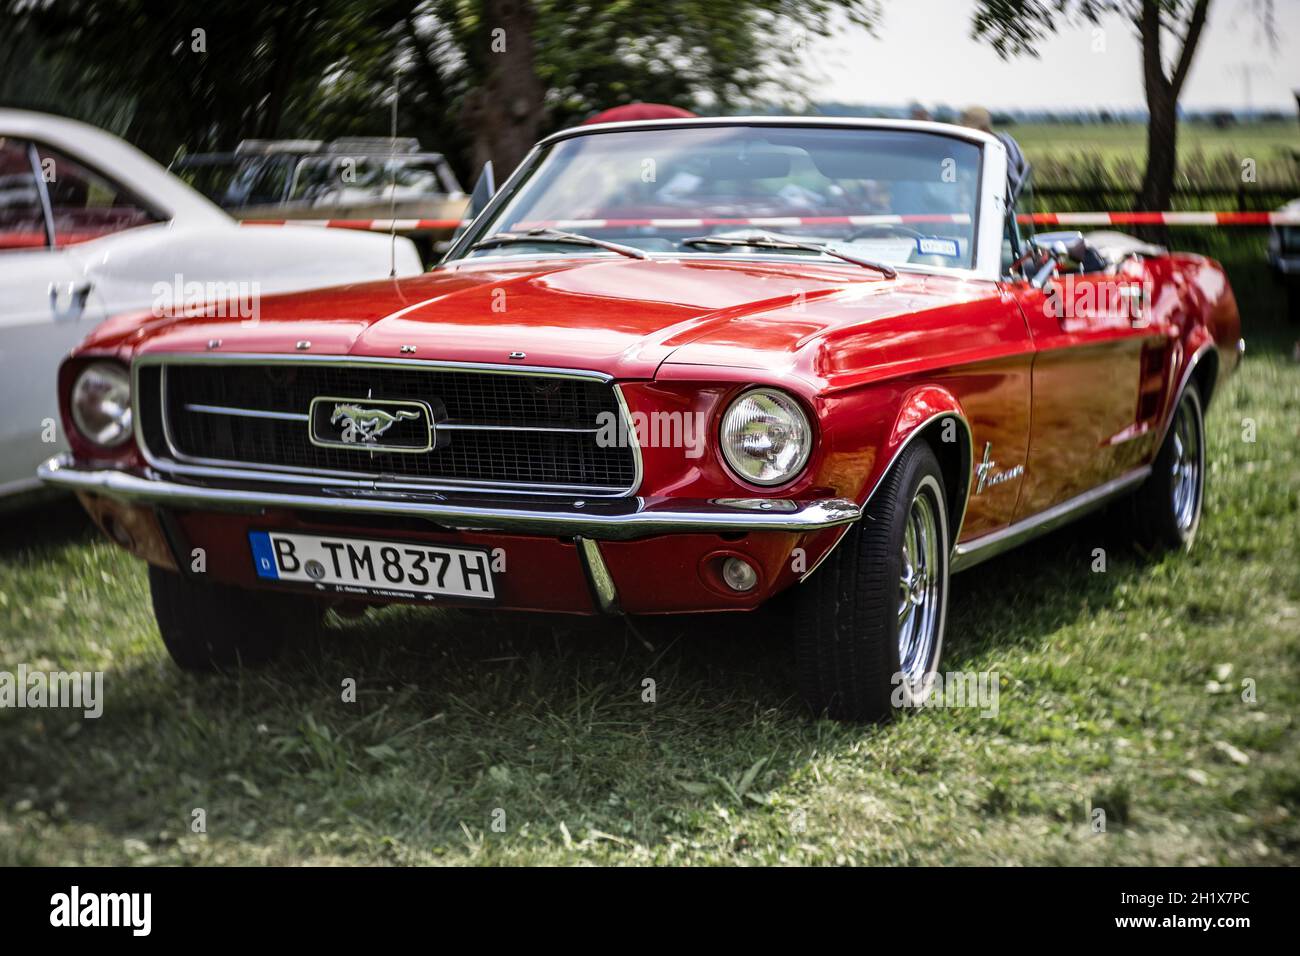 DIEDERSDORF, GERMANY - AUGUST 21, 2021: The iconic sports car Ford Mustang. Focus on center. Swirly bokeh. The exhibition of 'US Car Classics'. Stock Photo